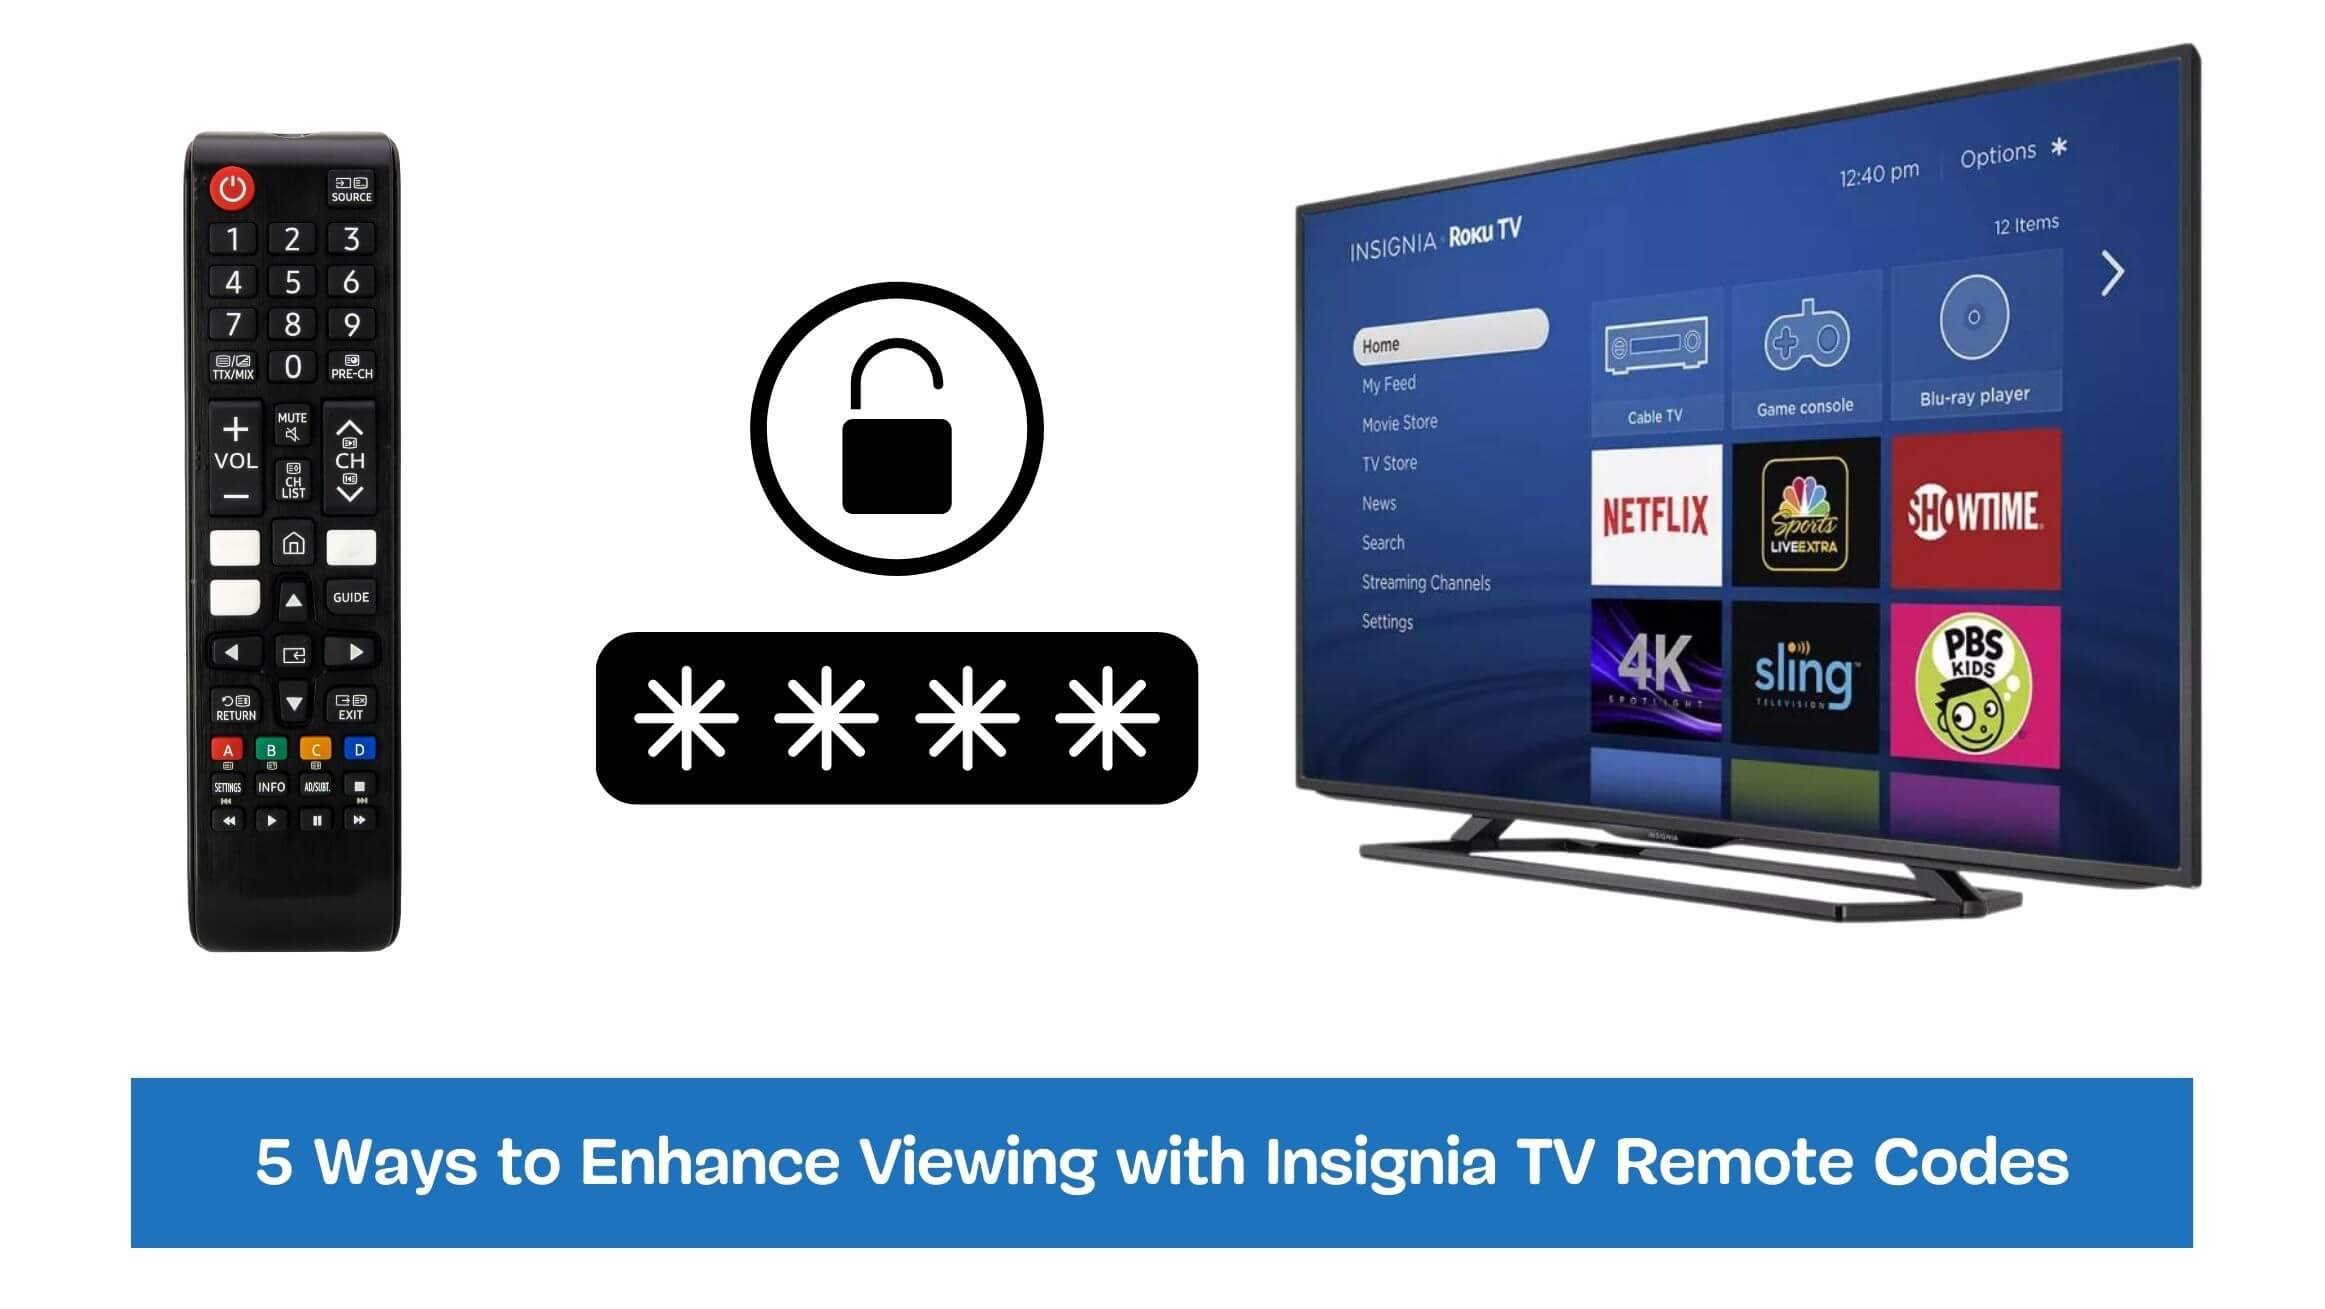 5 Ways to Enhance Viewing with Insignia TV Remote Codes